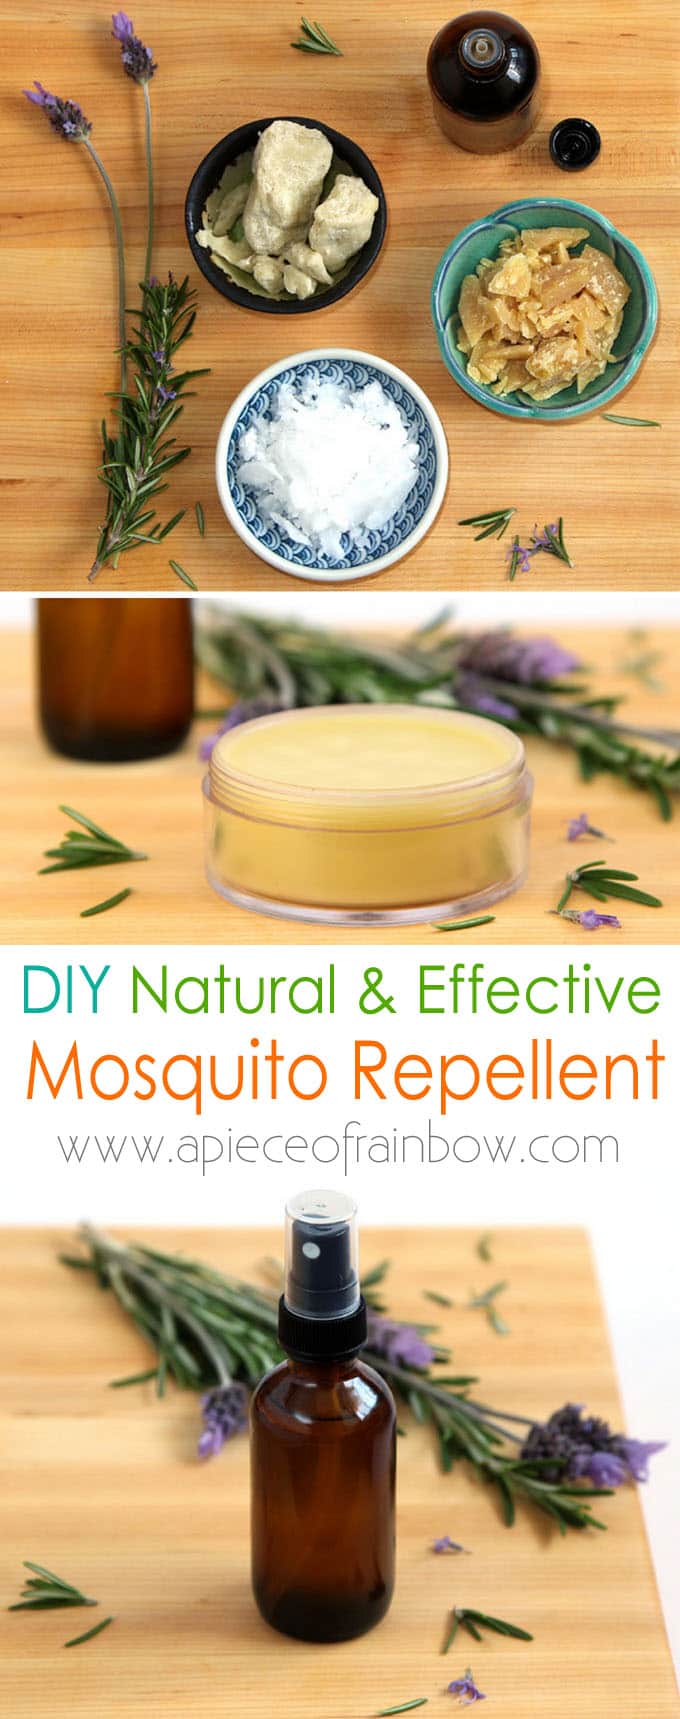 Homemade Natural Mosquito Repellent 2 Easy Recipes That Work Wonders A Piece Of Rainbow